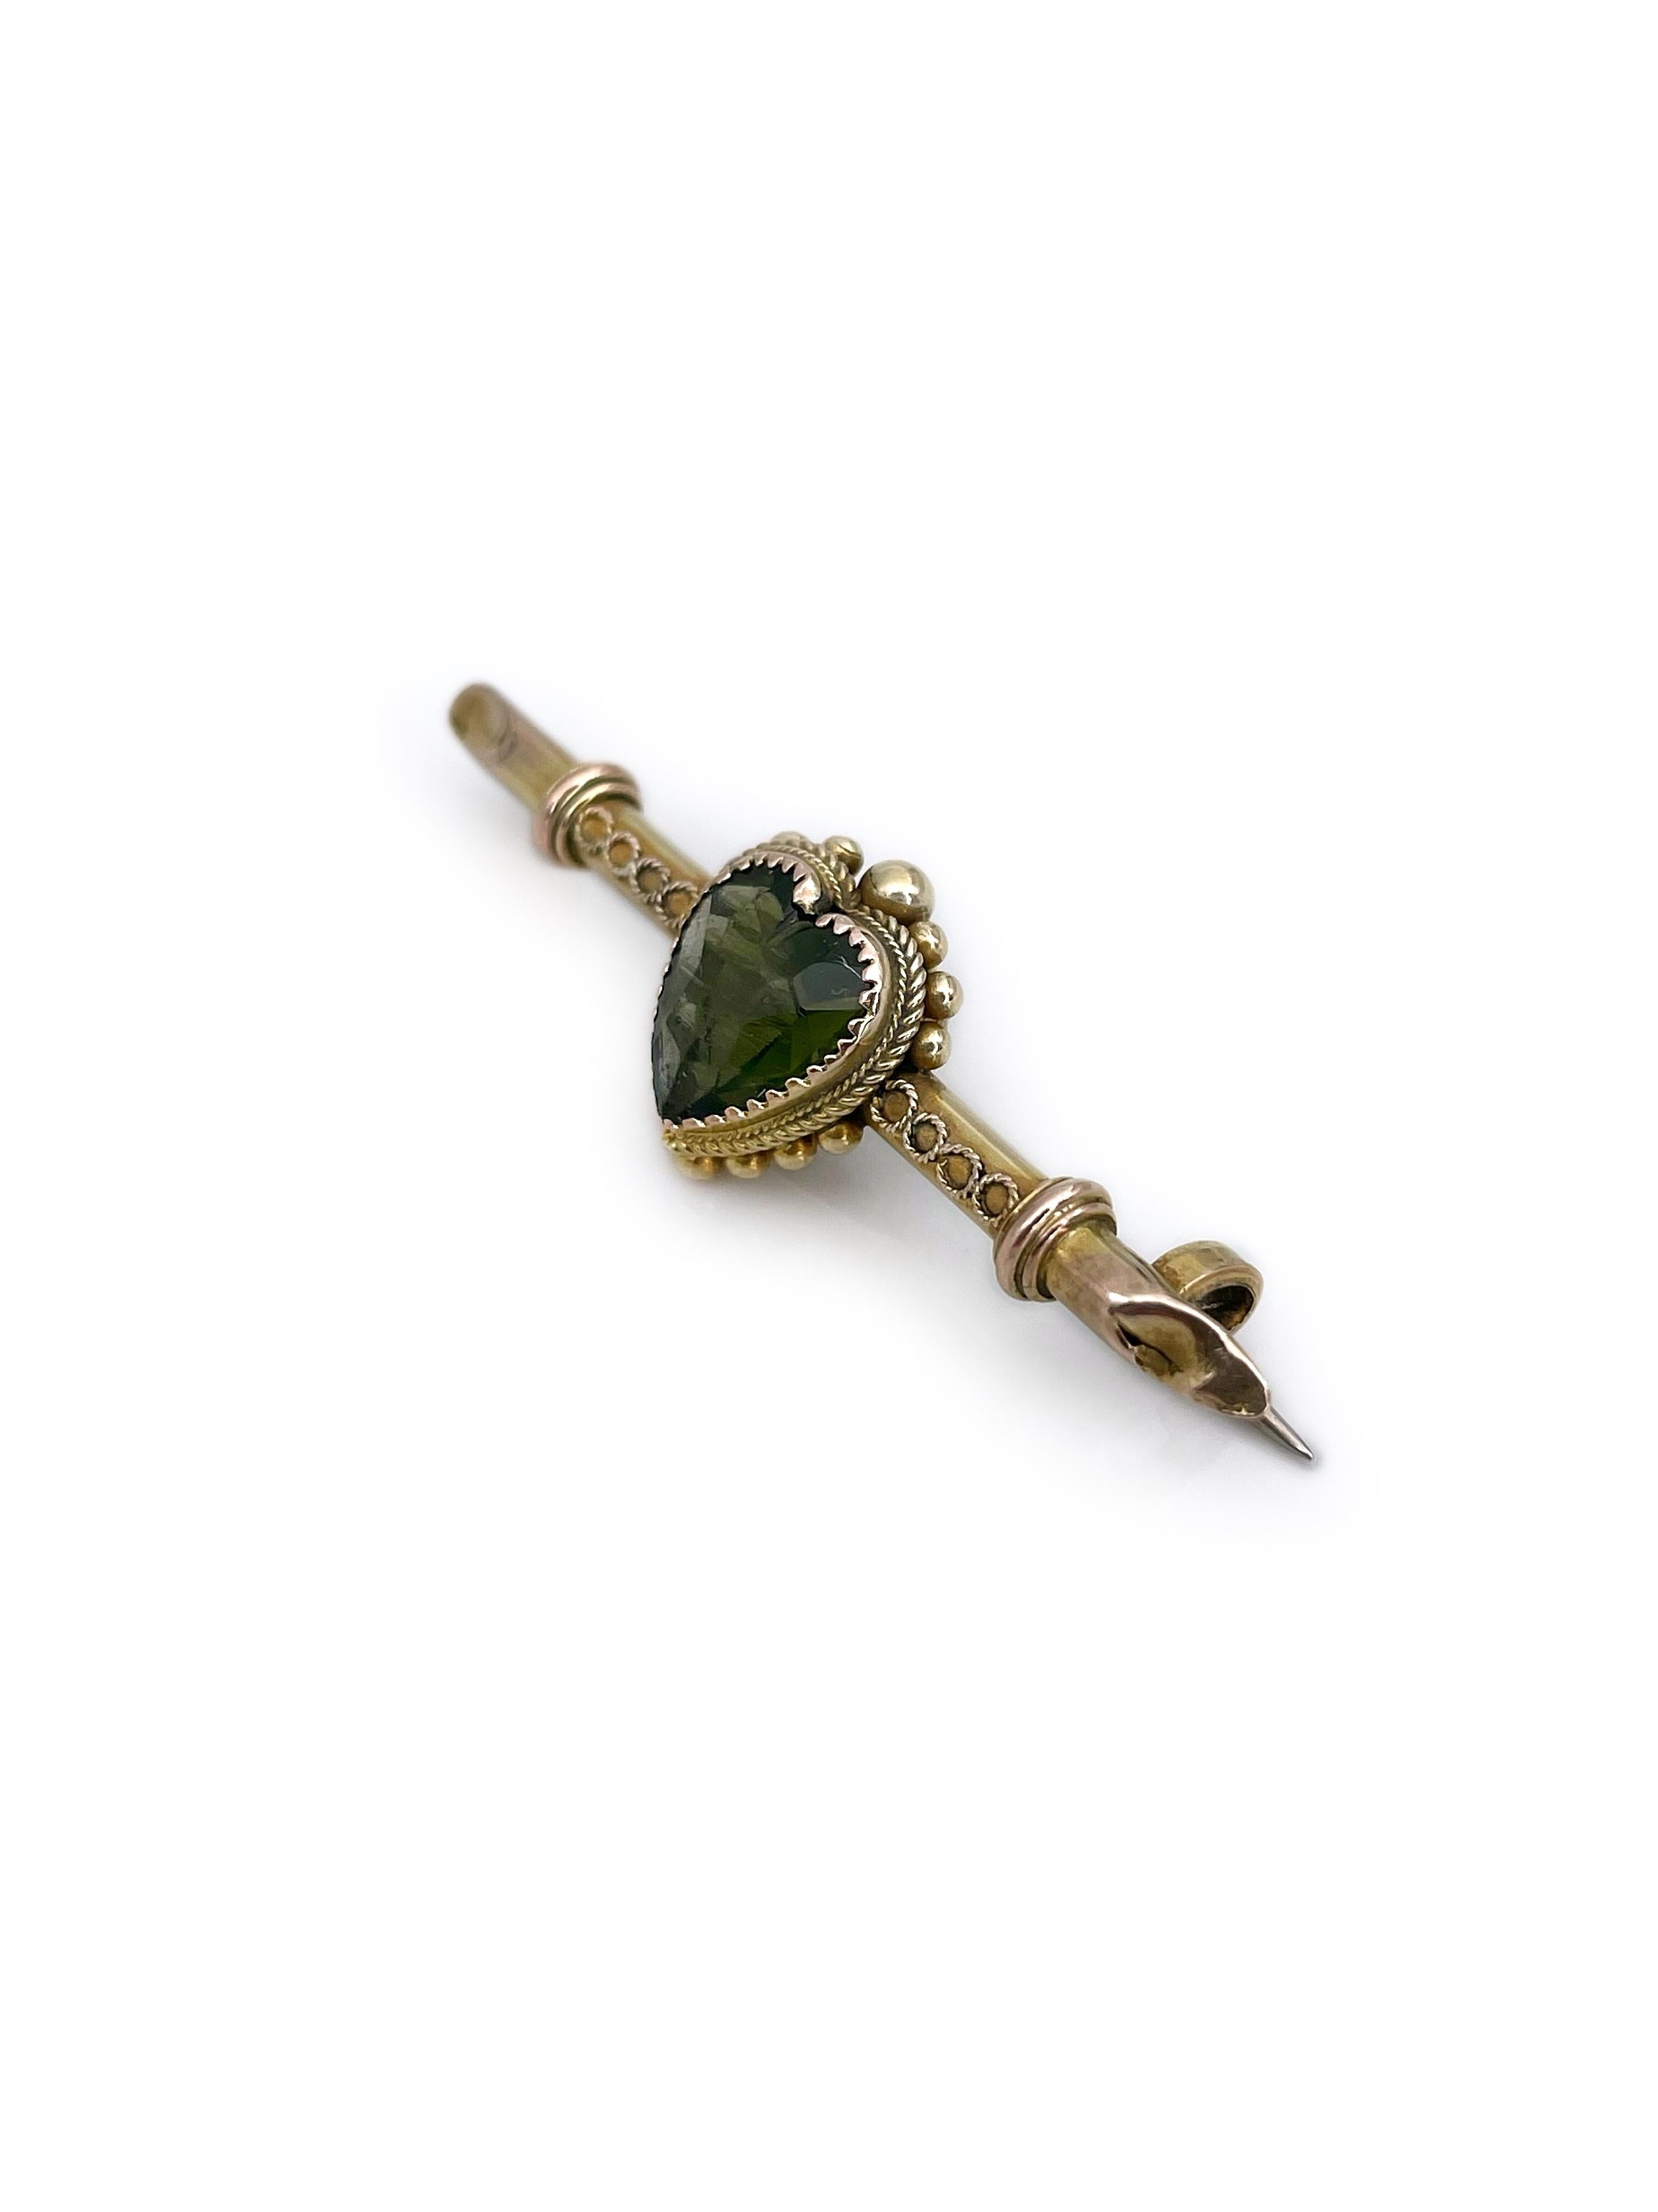 This is an Edwardian heart bar brooch crafted in 9K gold. The piece features dark green paste in the centre. 

Has hallmarks - can be seen in photo gallery.

Weight: 2.29g
Size: 4.3x1.2cm

———

If you have any questions, please feel free to ask. We